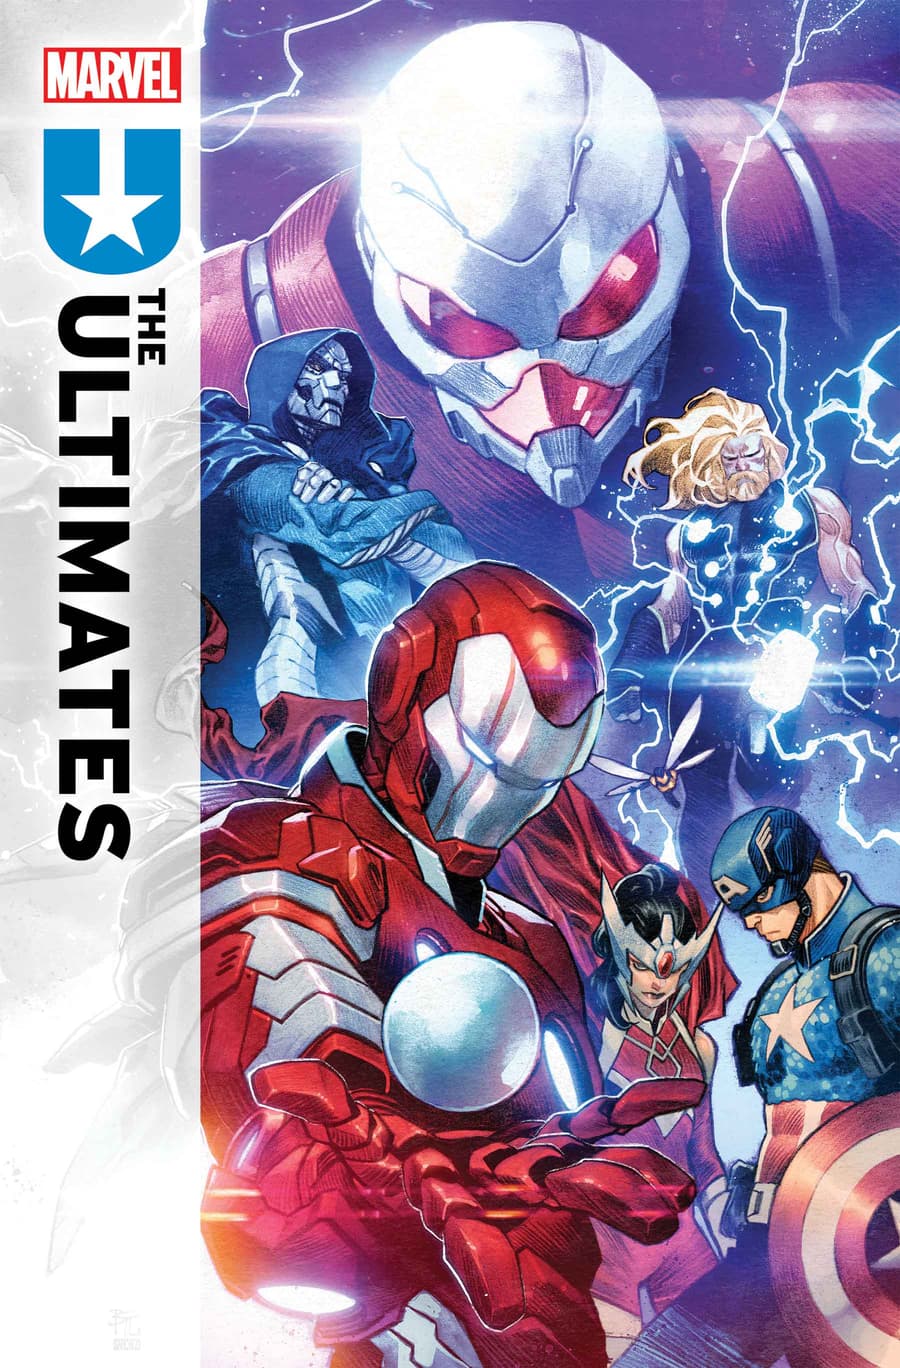 The Ultimate Universe's Mightiest Heroes Assemble in 'Ultimates' 1